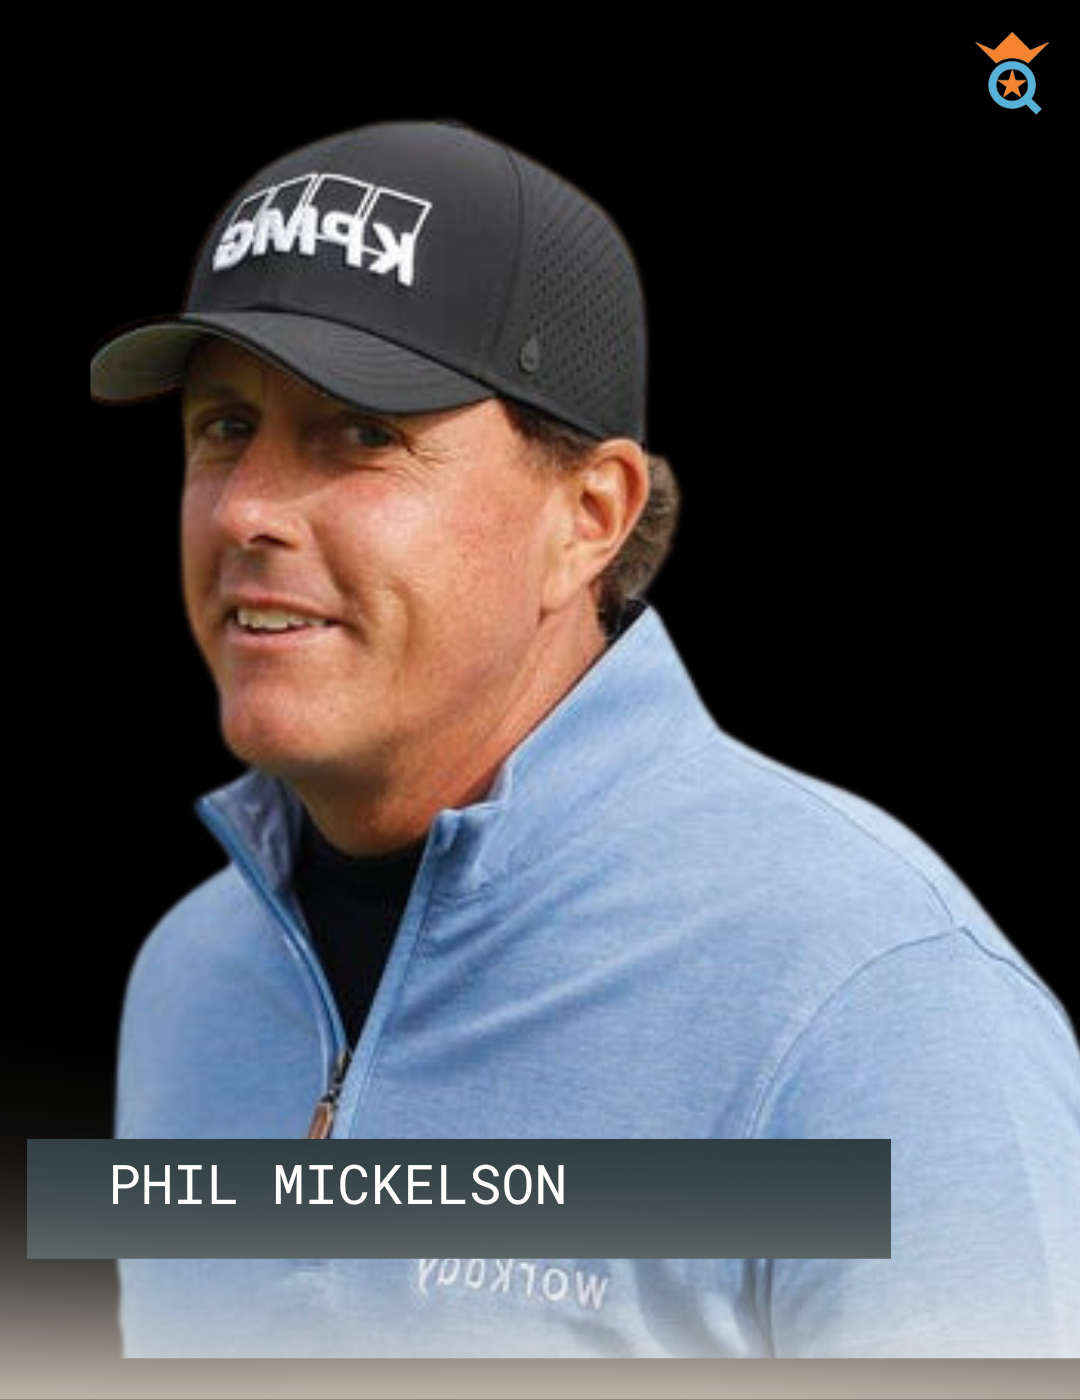 Best Golf Players of All Time, Phil Mickelson